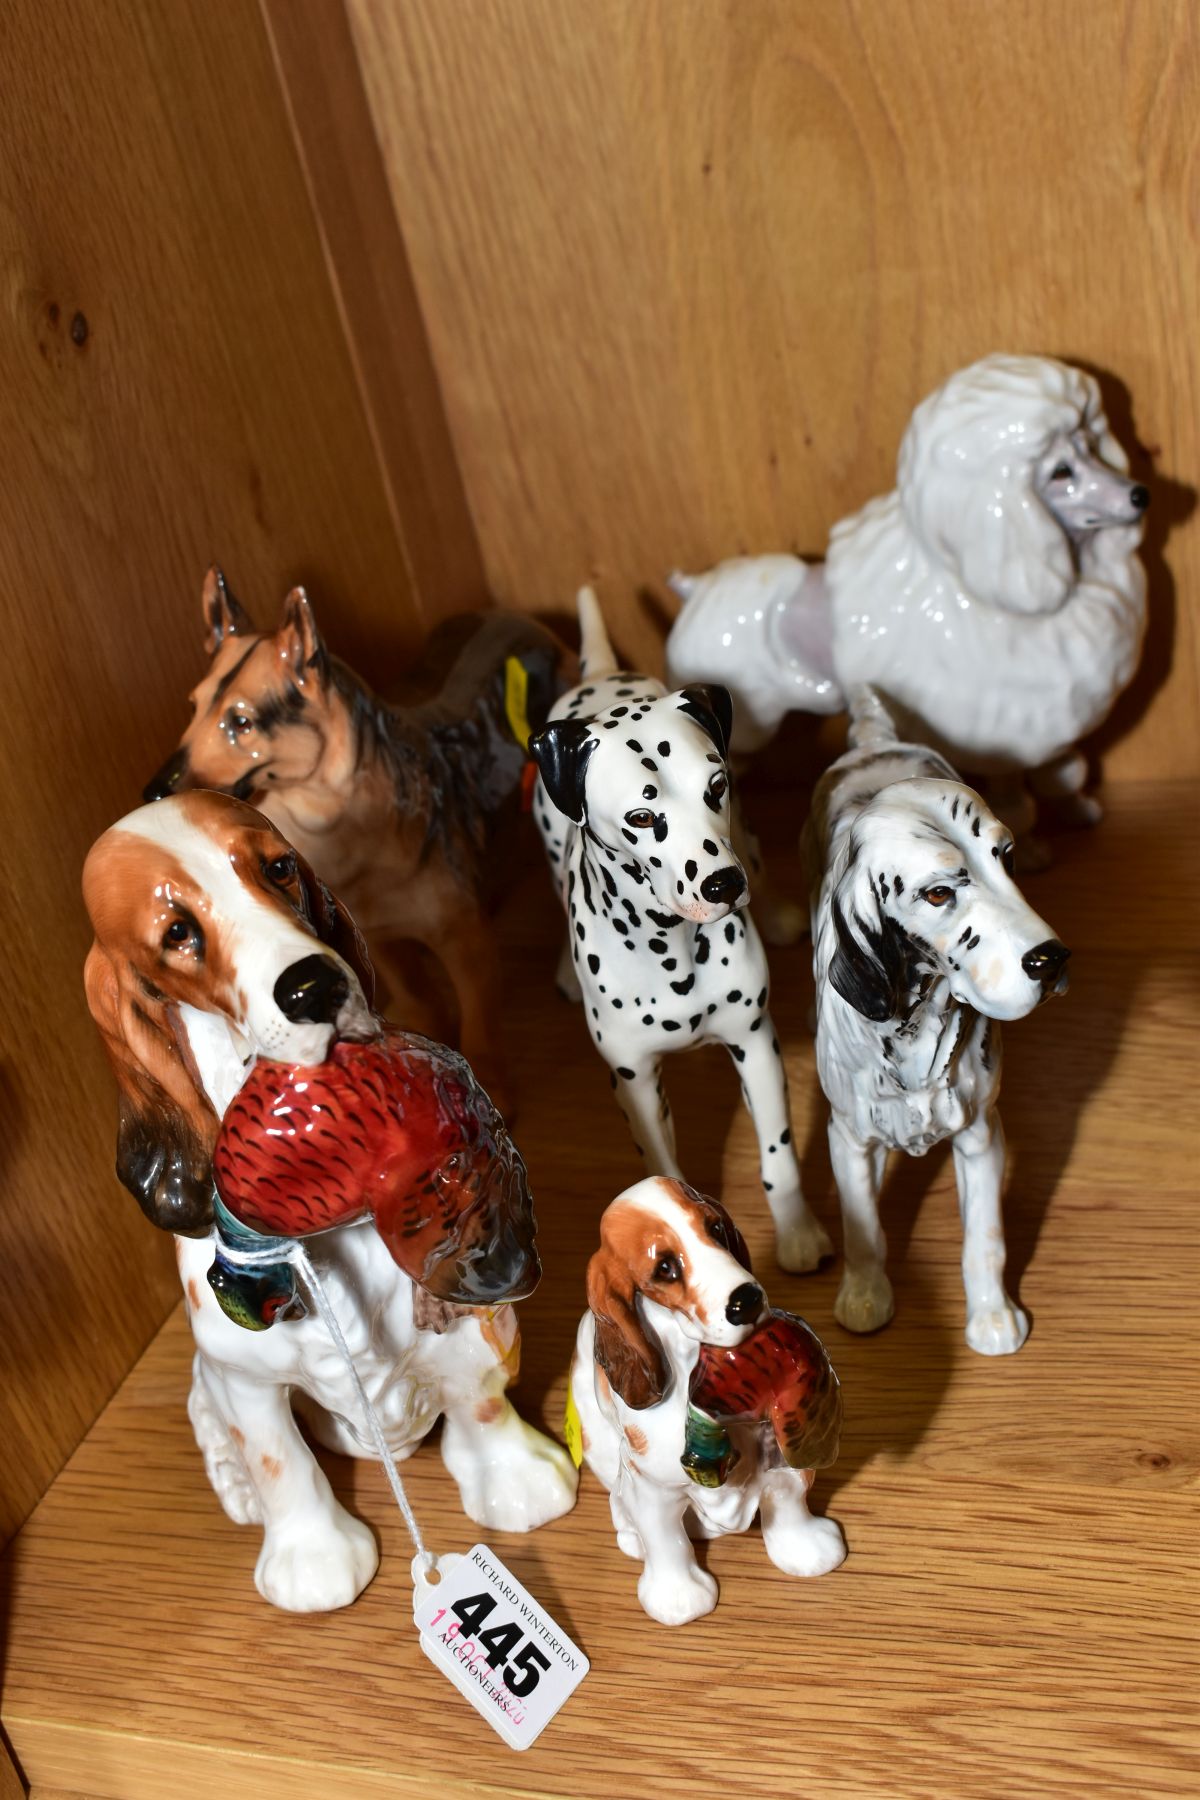 SIX ROYAL DOULTON DOGS 'Cocker Spaniel with Pheasant' HN1001, height 16.5cm, 'Cocker Spaniel with